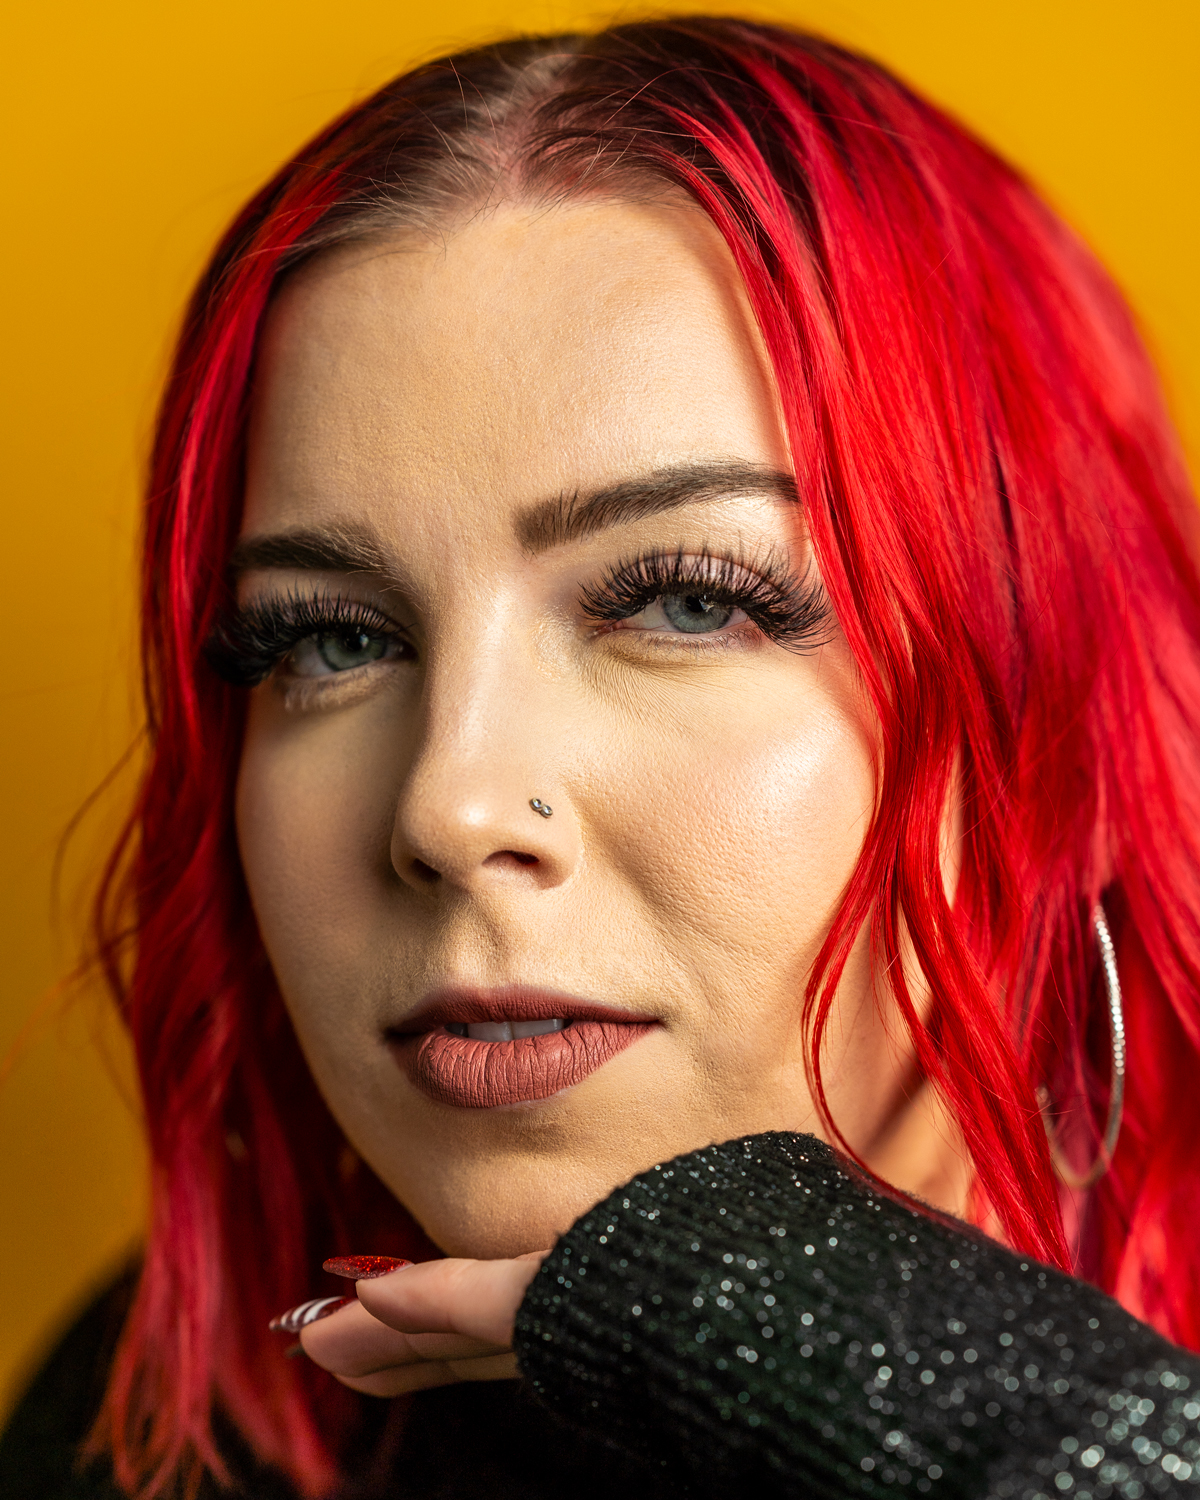 Portrait of Carly Schlichtman with red hair against yellow background.